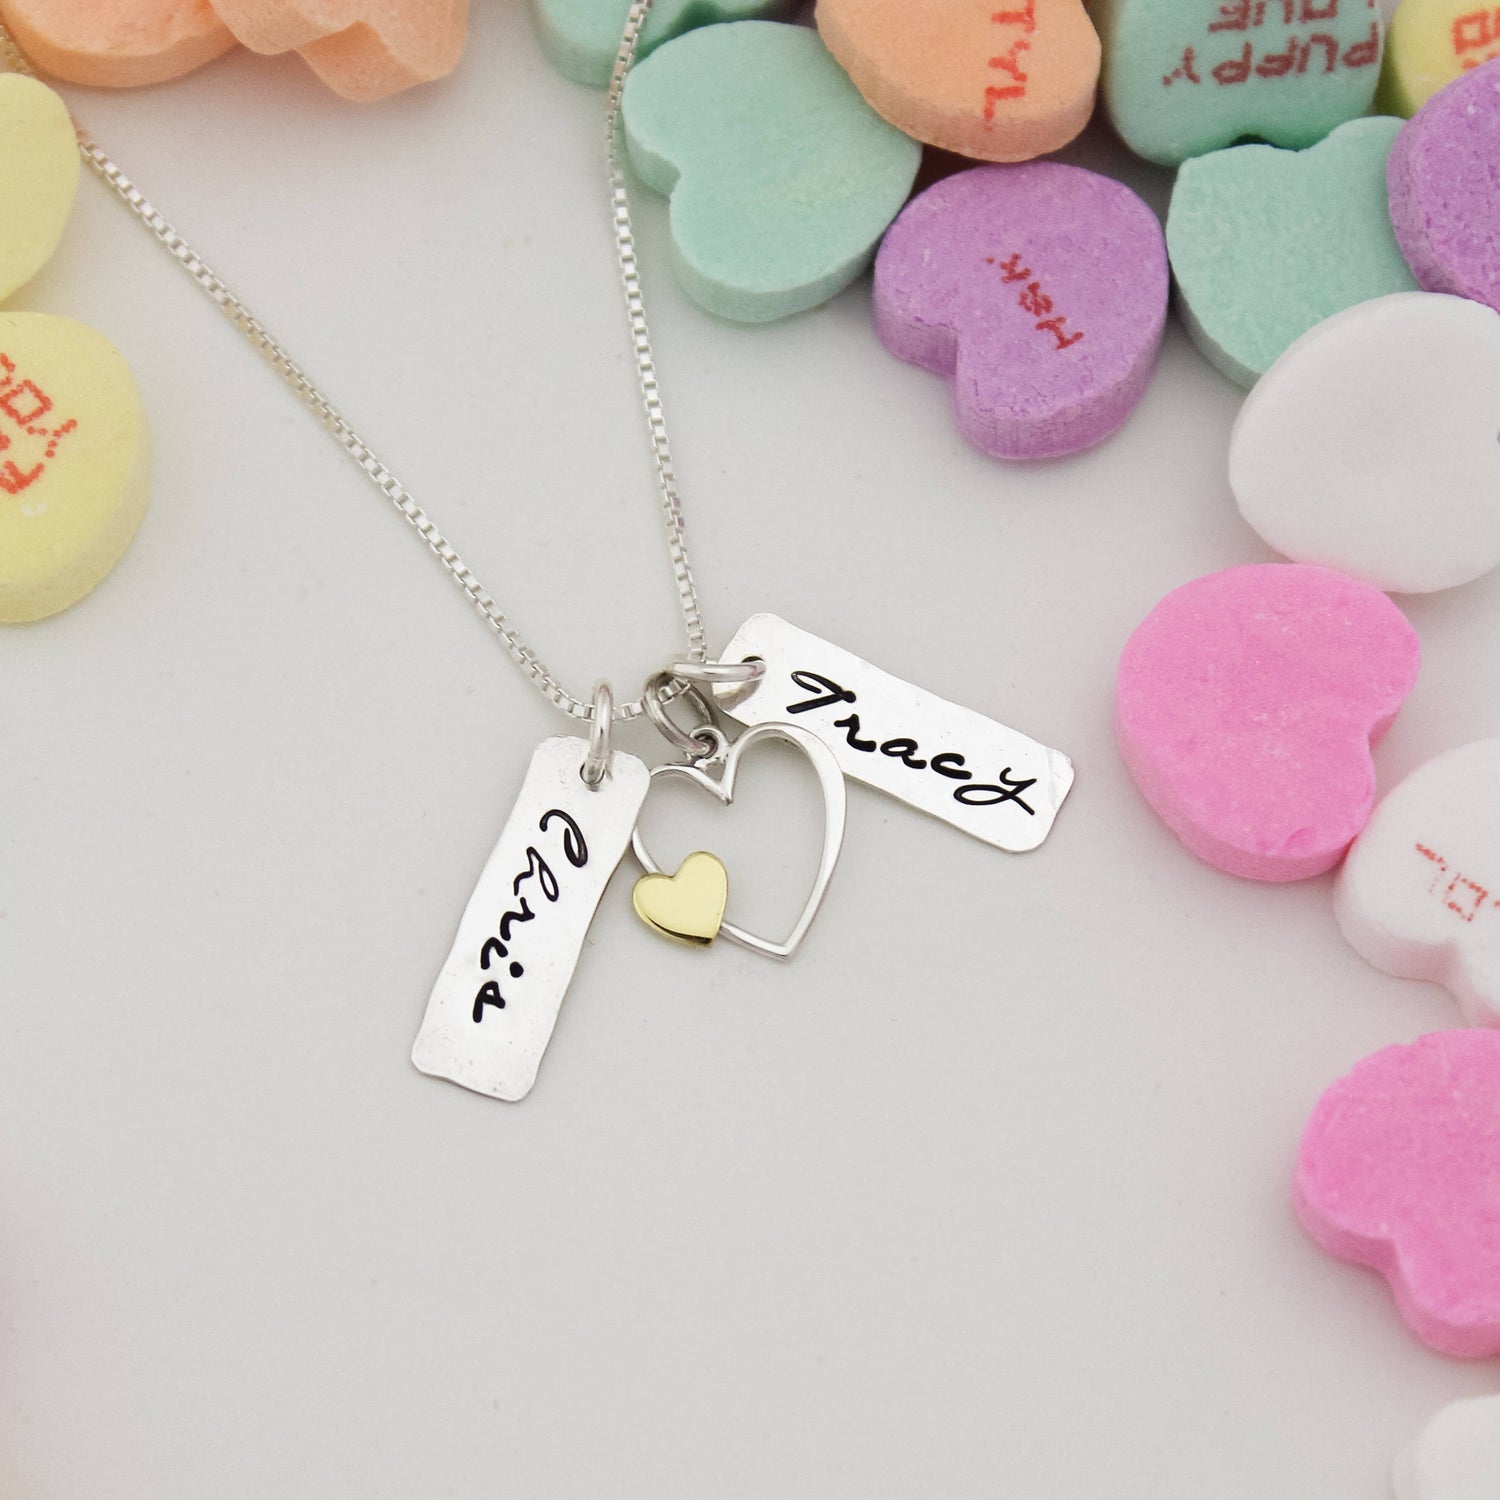 Heart and Tag Necklace, Personalized Heart Necklace, Valentine's Day Gift, Mommy Necklace, Gifts for Her, Cute Heart Necklace